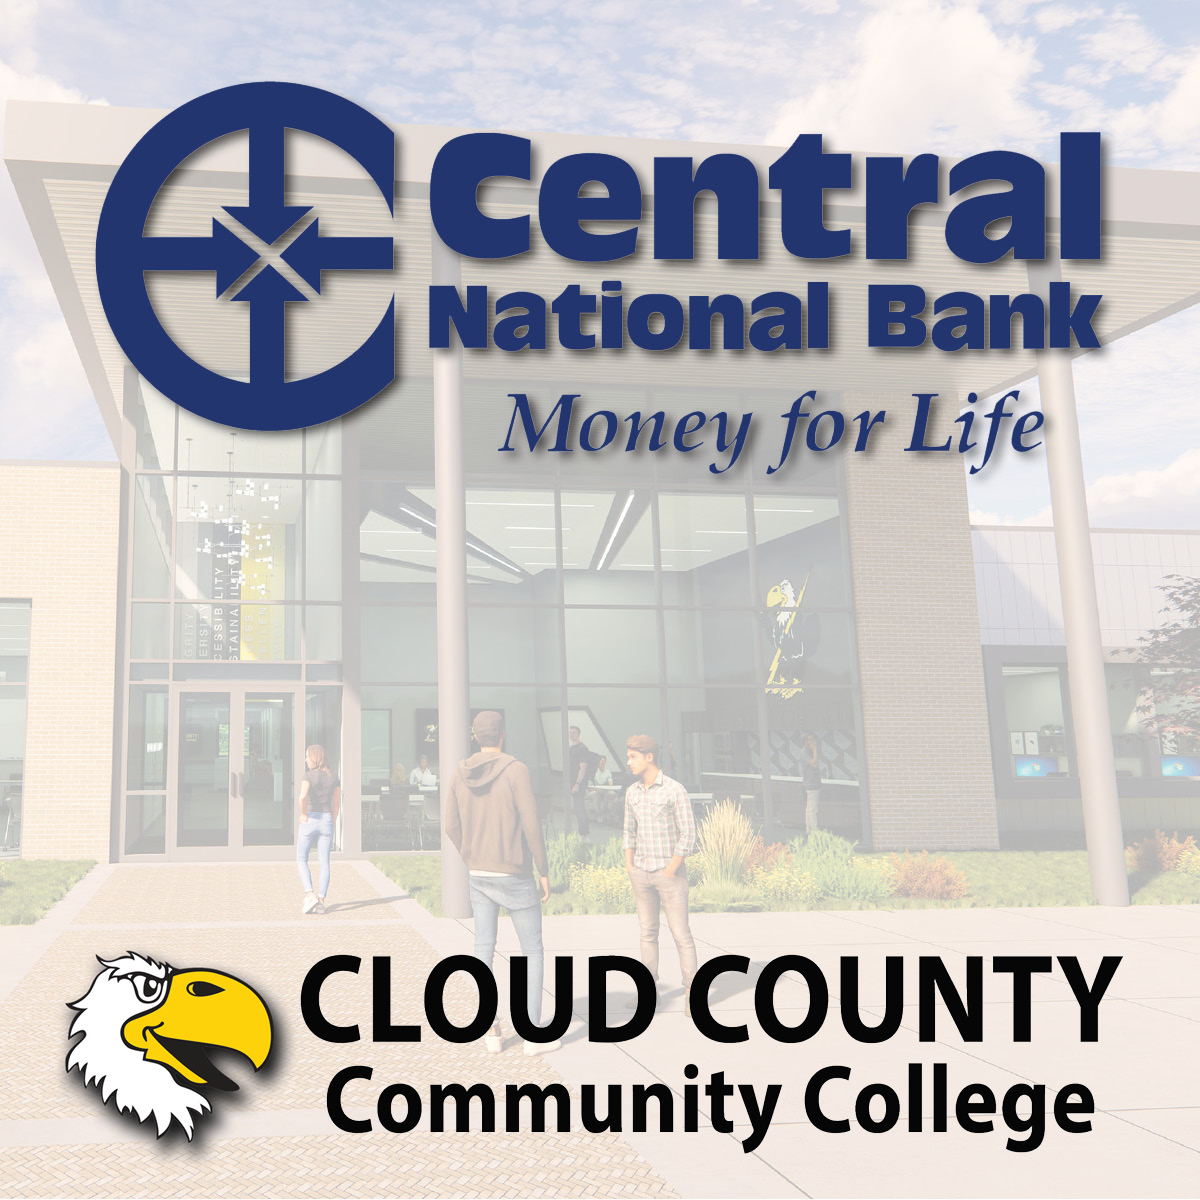 Central National Bank and CCCC logos.